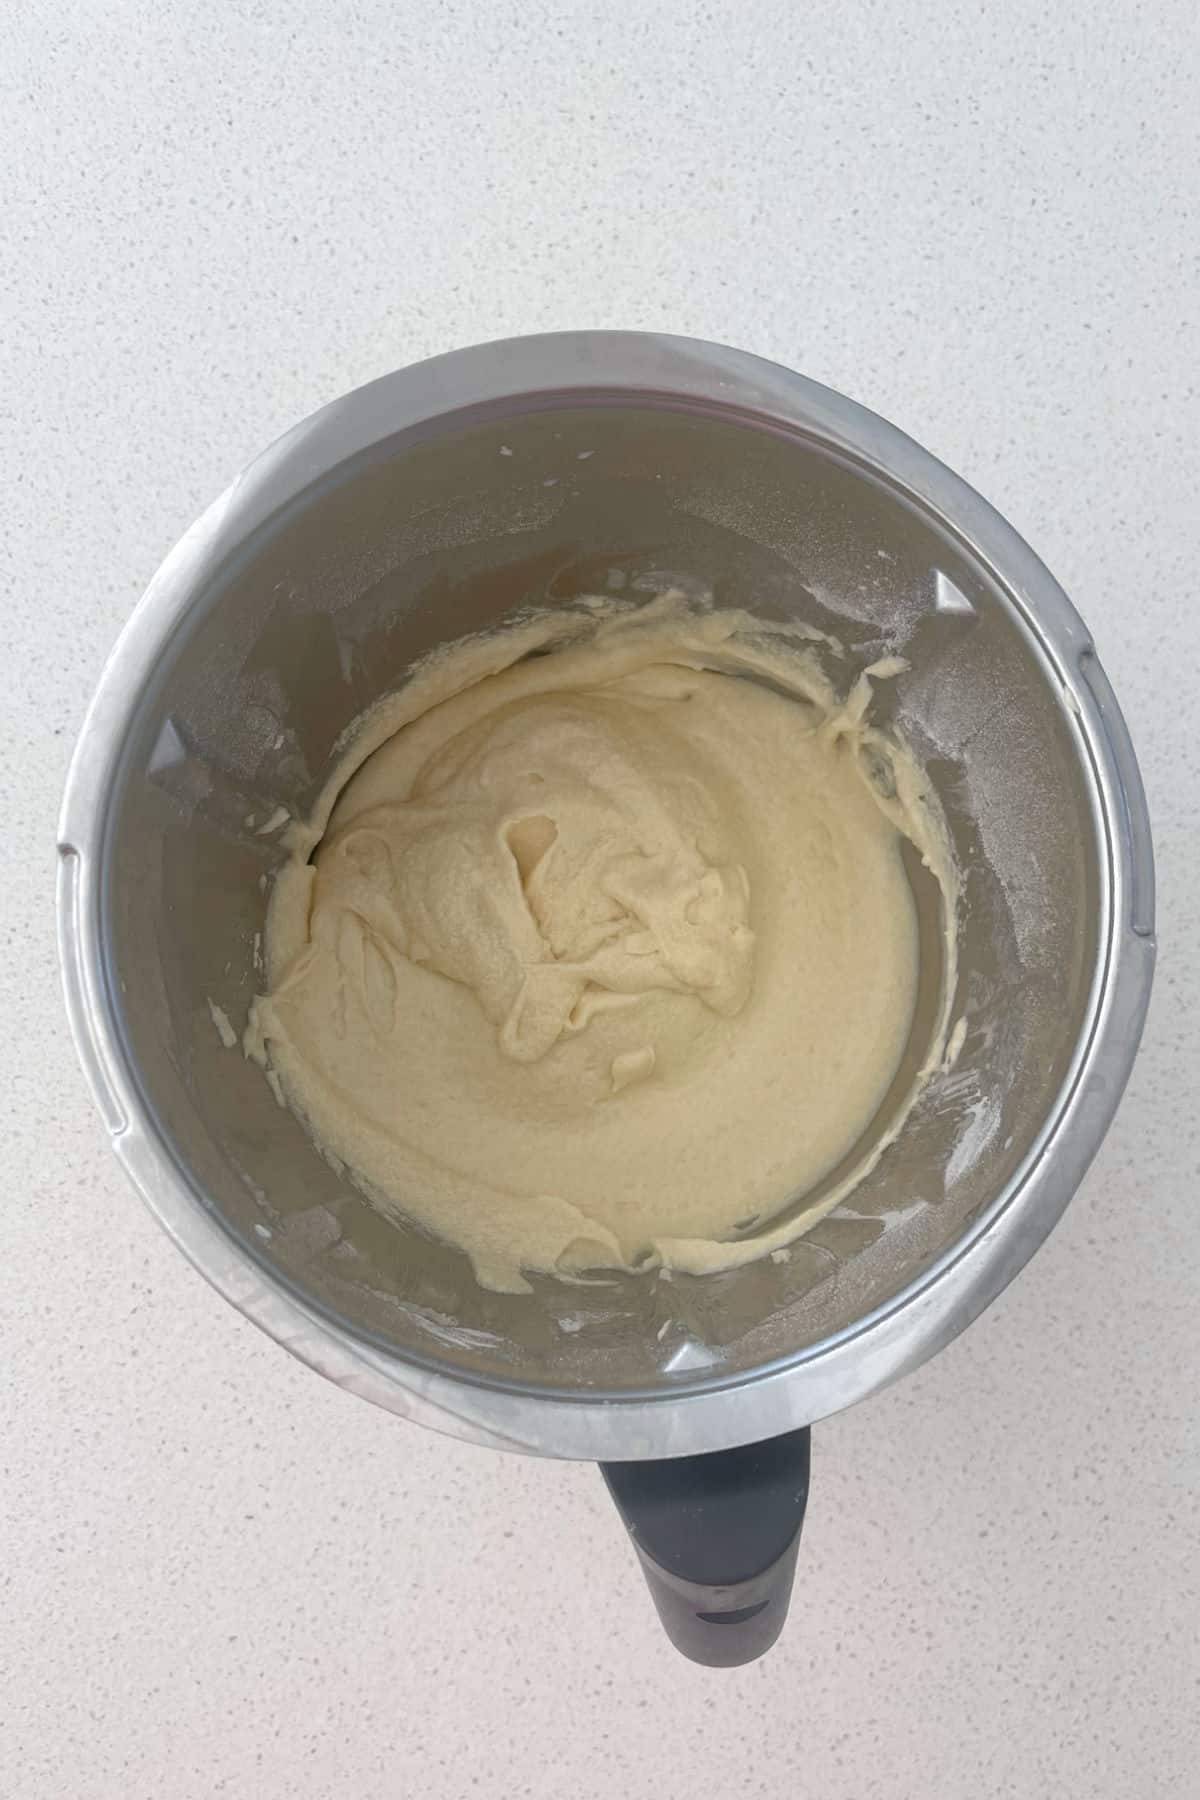 Cake batter in a Thermomix bowl.